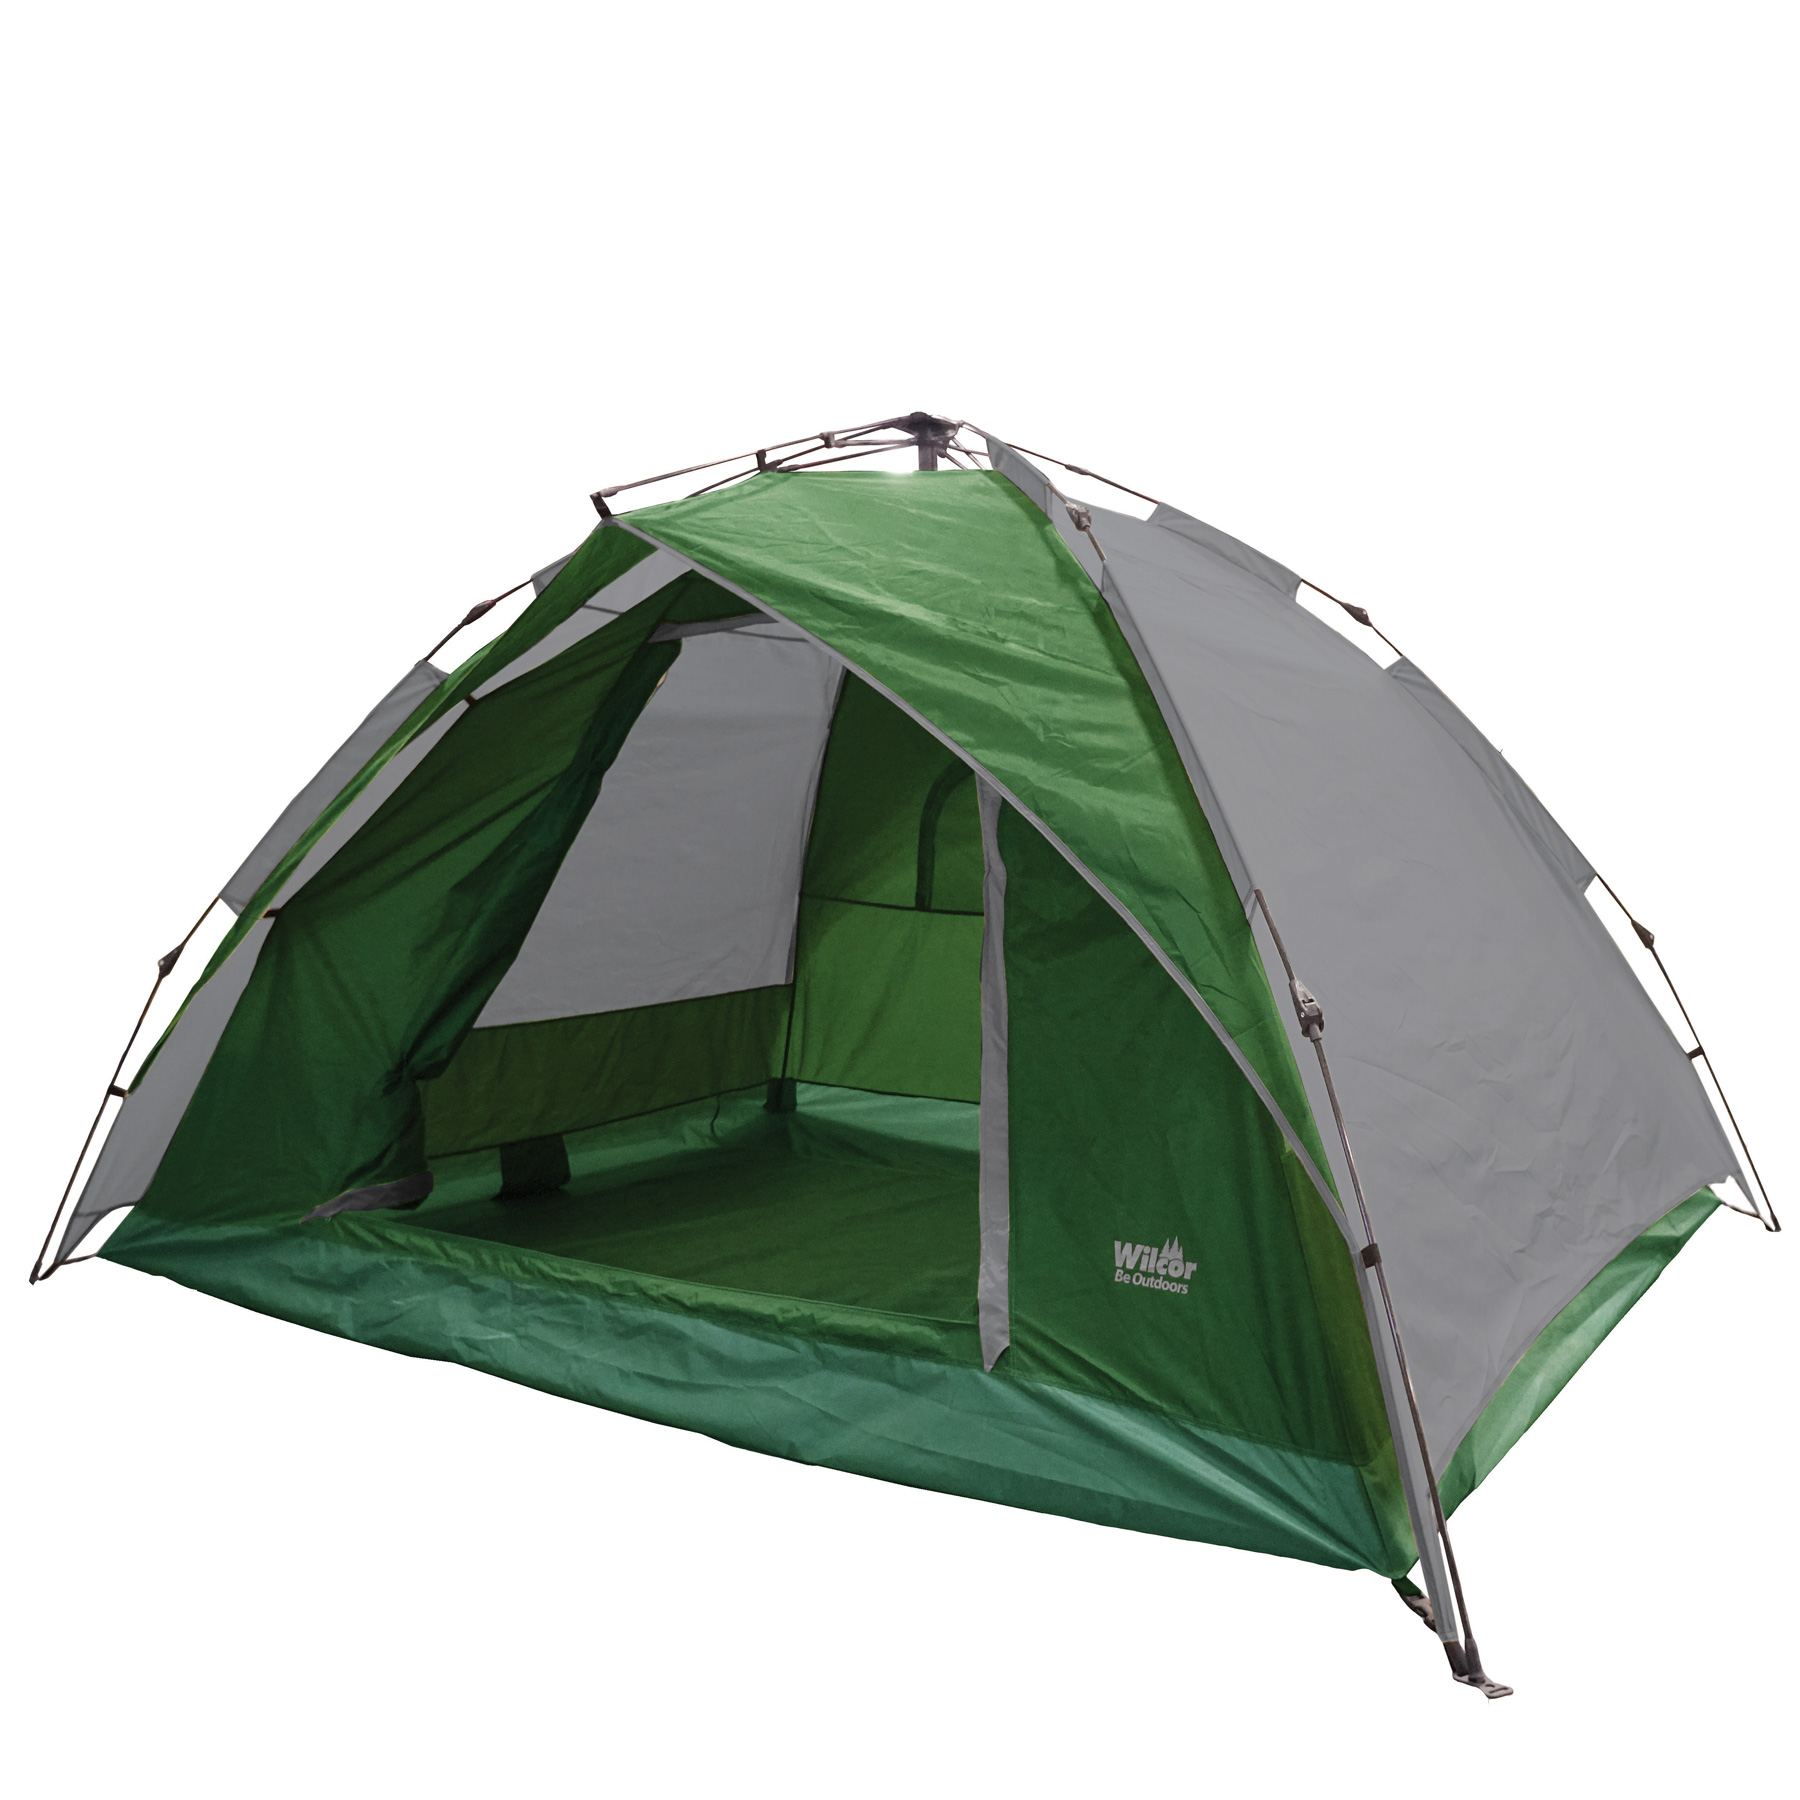 Wilcor International Wholesale Importer, Outdoor Gear,Camping 